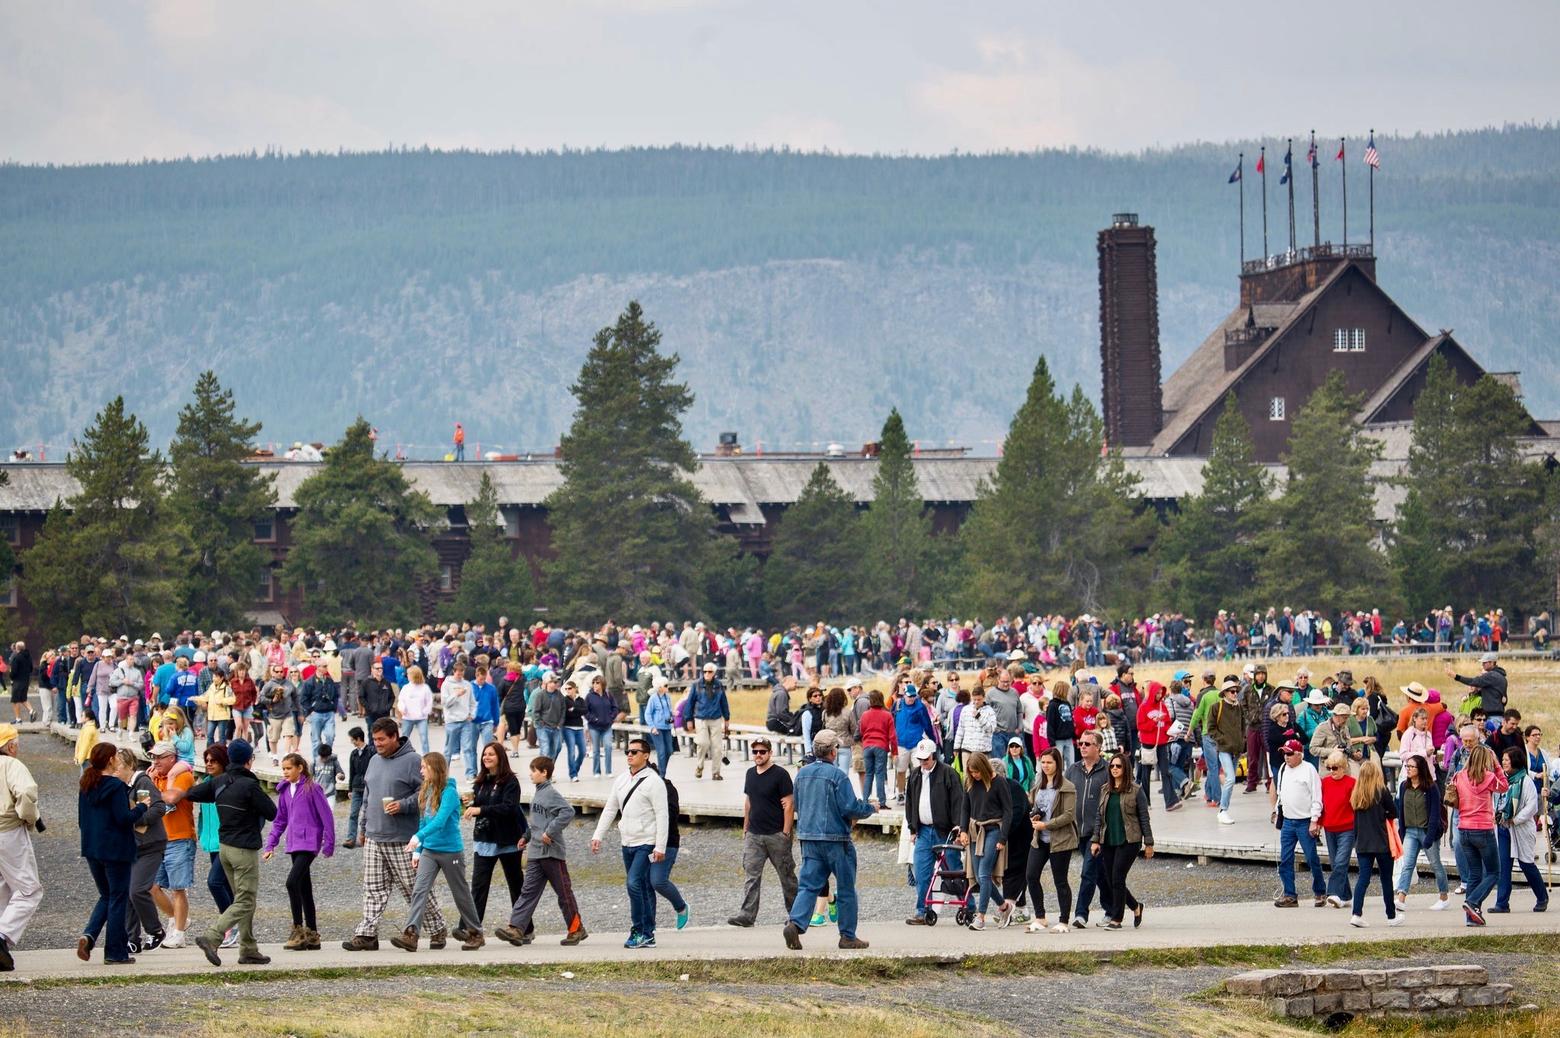 Crowds gather or leave following an eruption of Old Faithful Geyser.  In Yellowstone in 2021, the park notched a record 4.86 million visits and that didn't even include international bus tour traffic which has not been present during Covid. The time of intense visitation has expanded well beyond the Memorial Day to Labor Day stretch in both Yellowstone and Jackson Hole. Photo courtesy Jacob W. Frank/NPS